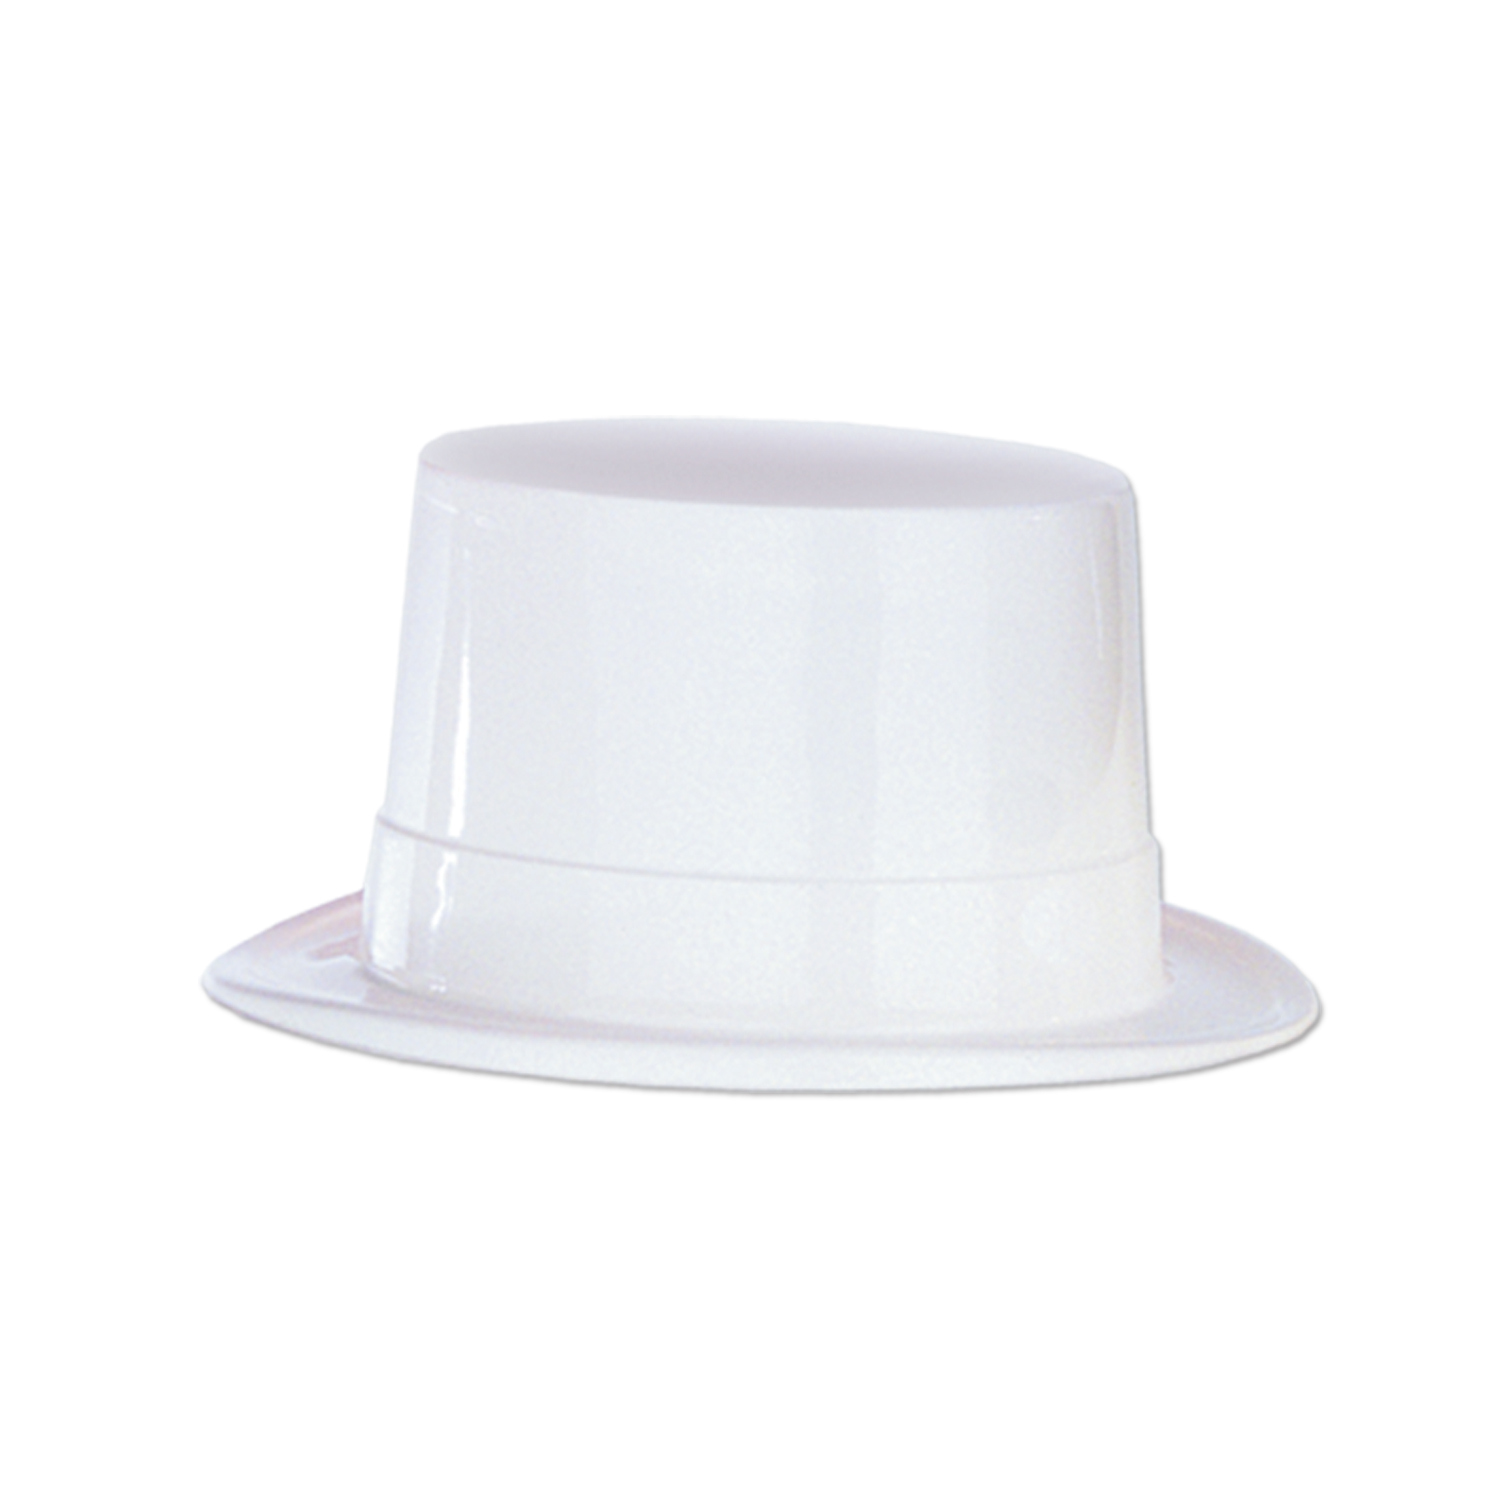 White plastic material molded into a tradition top hat.